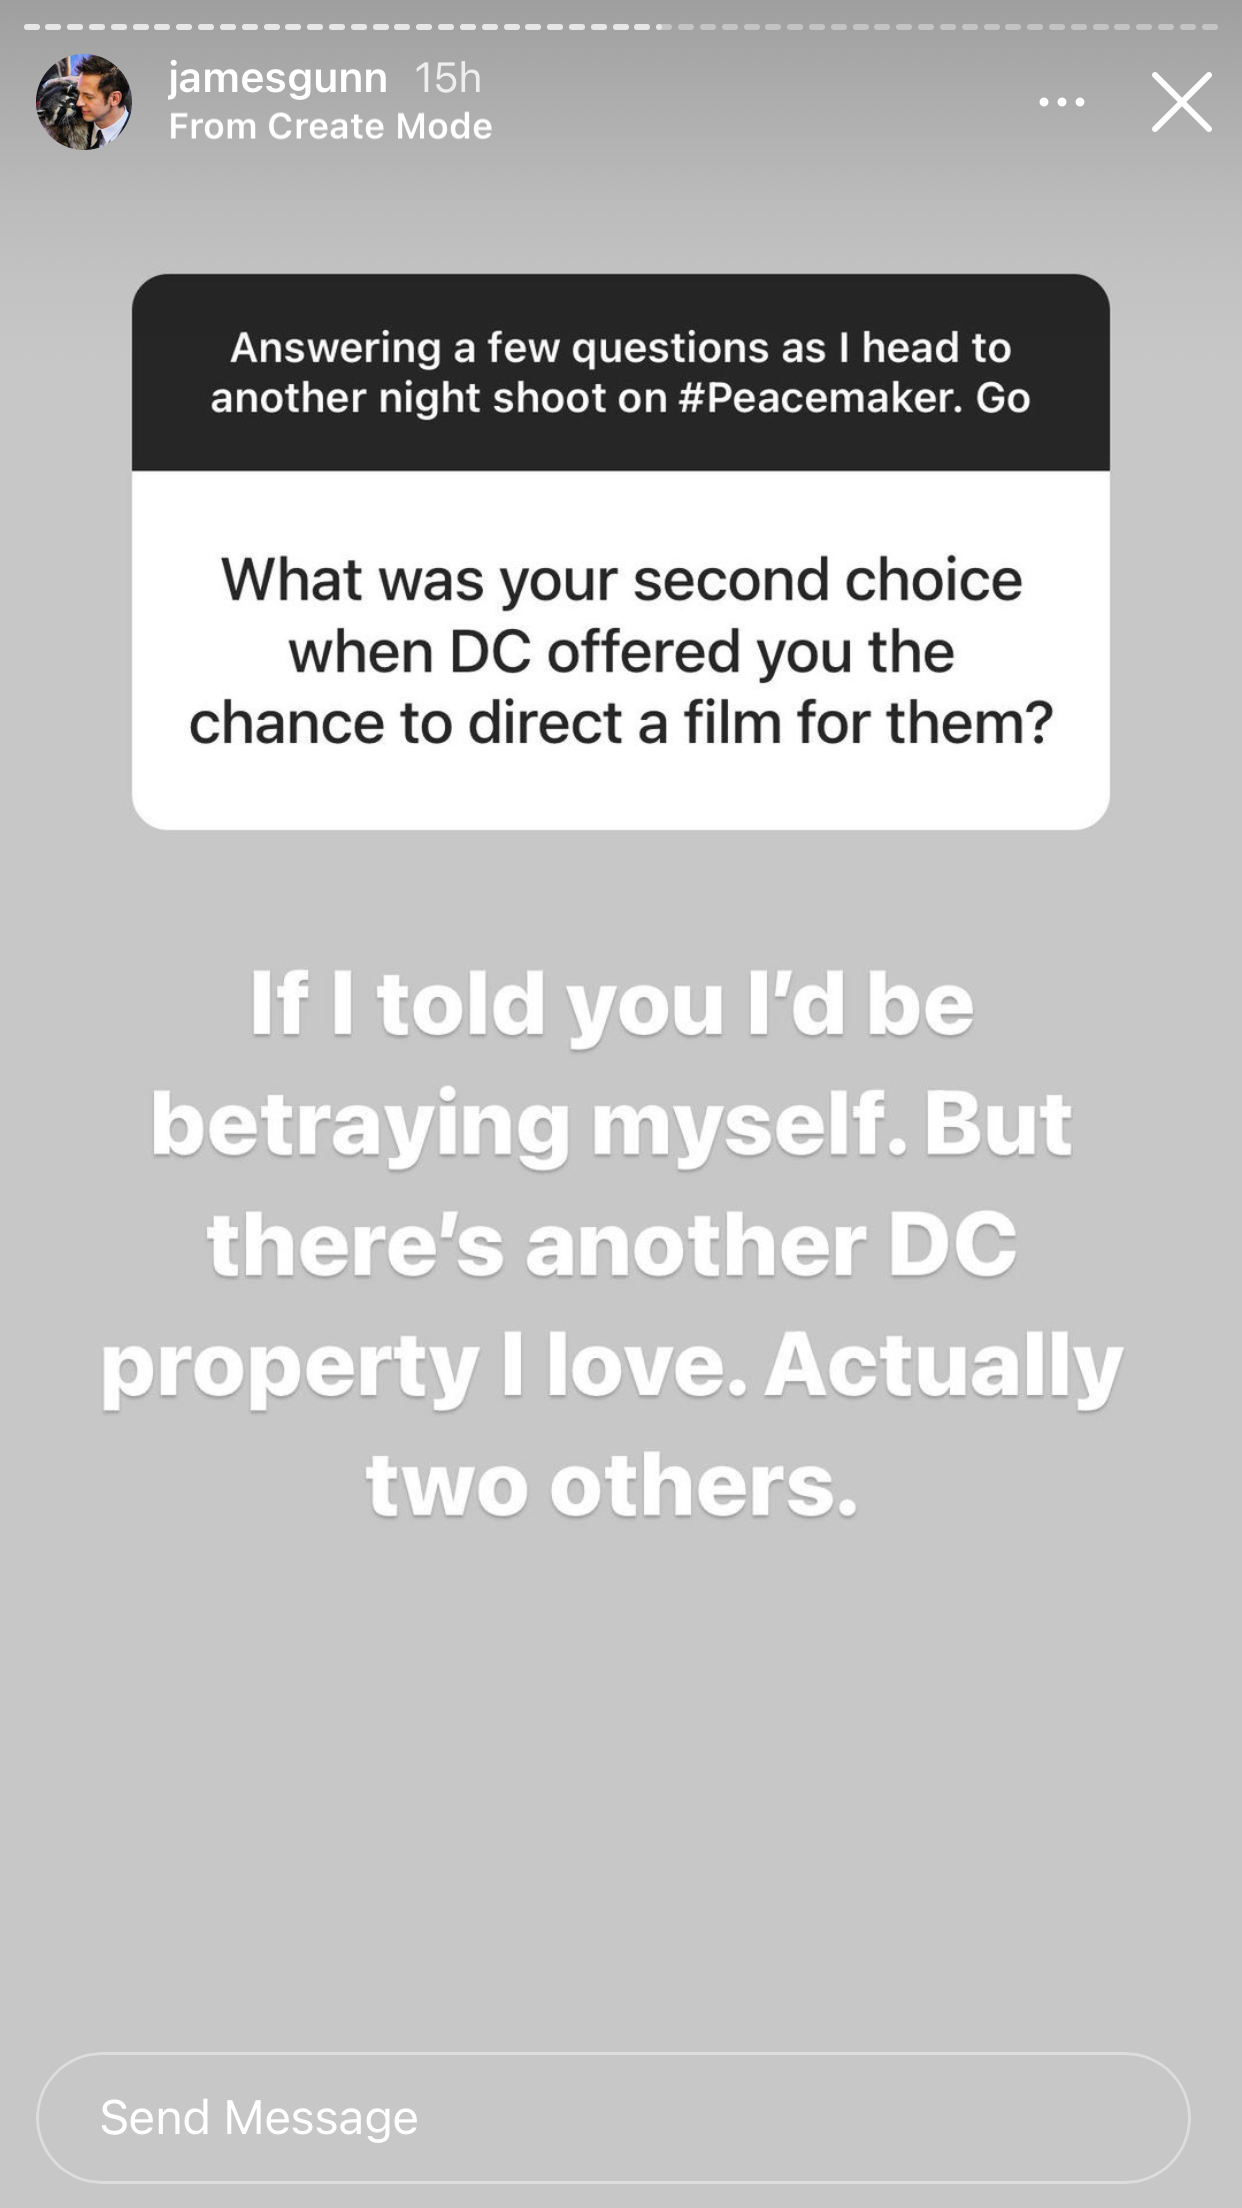 James Gunn's response to the potential for other DC Films. 